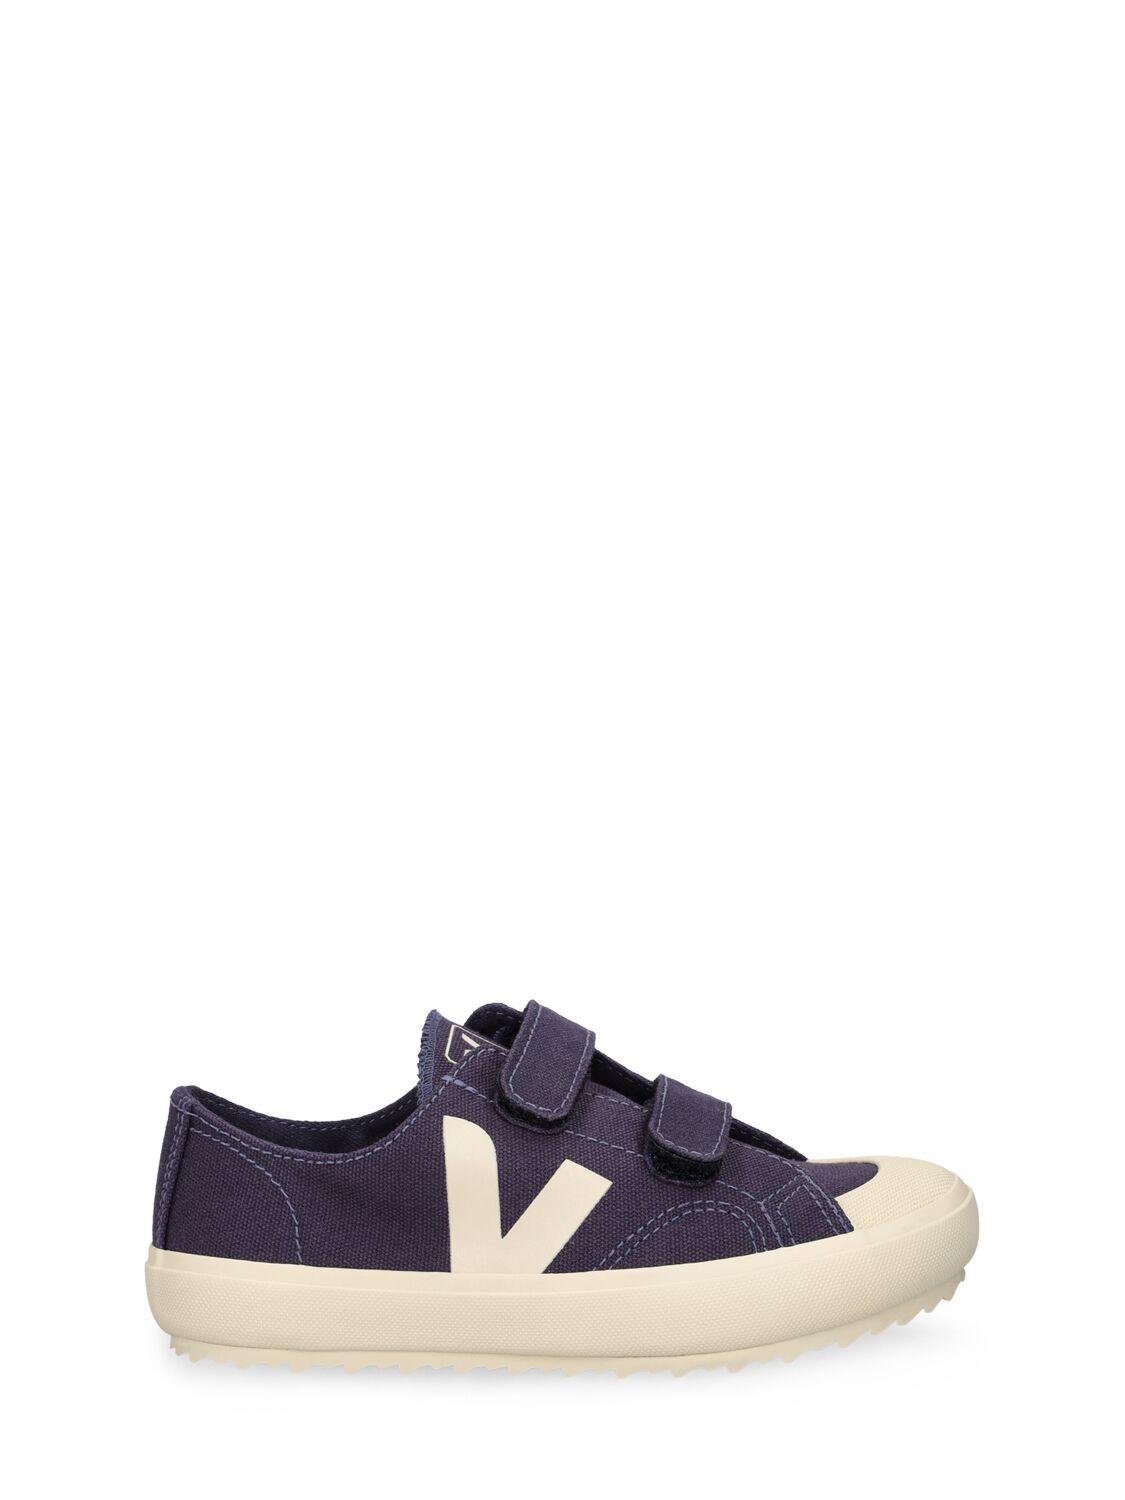 Organic Cotton Canvas Strap Sneakers by VEJA